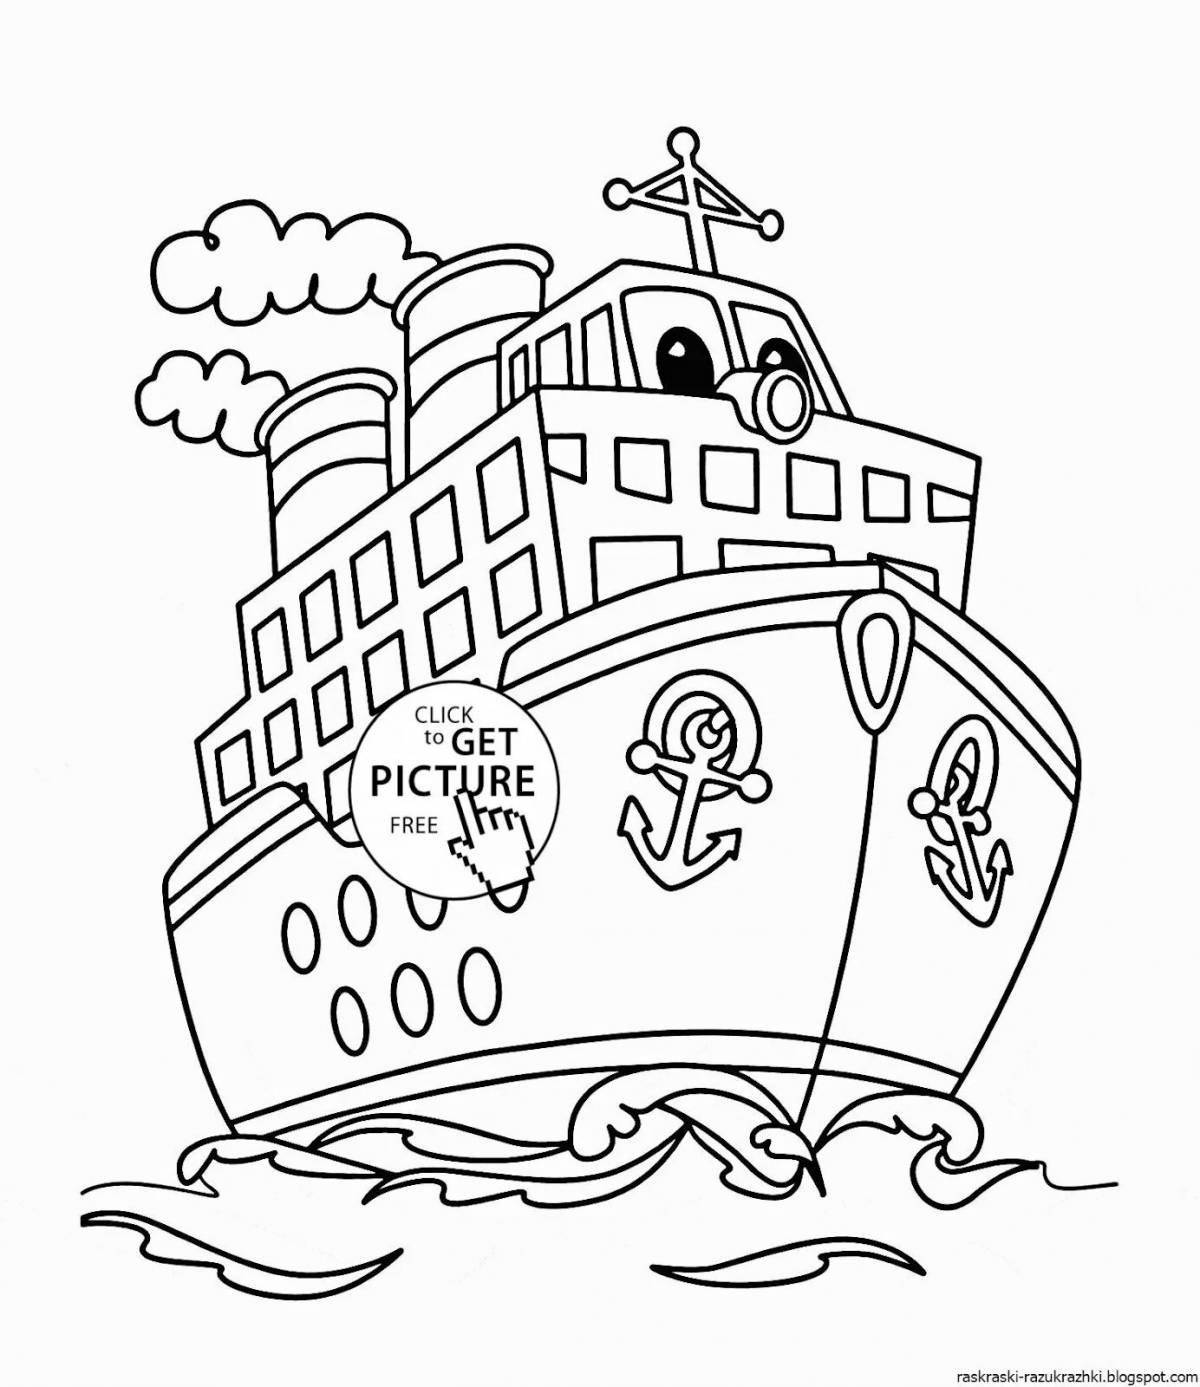 Colorful ship coloring book for 7 year olds